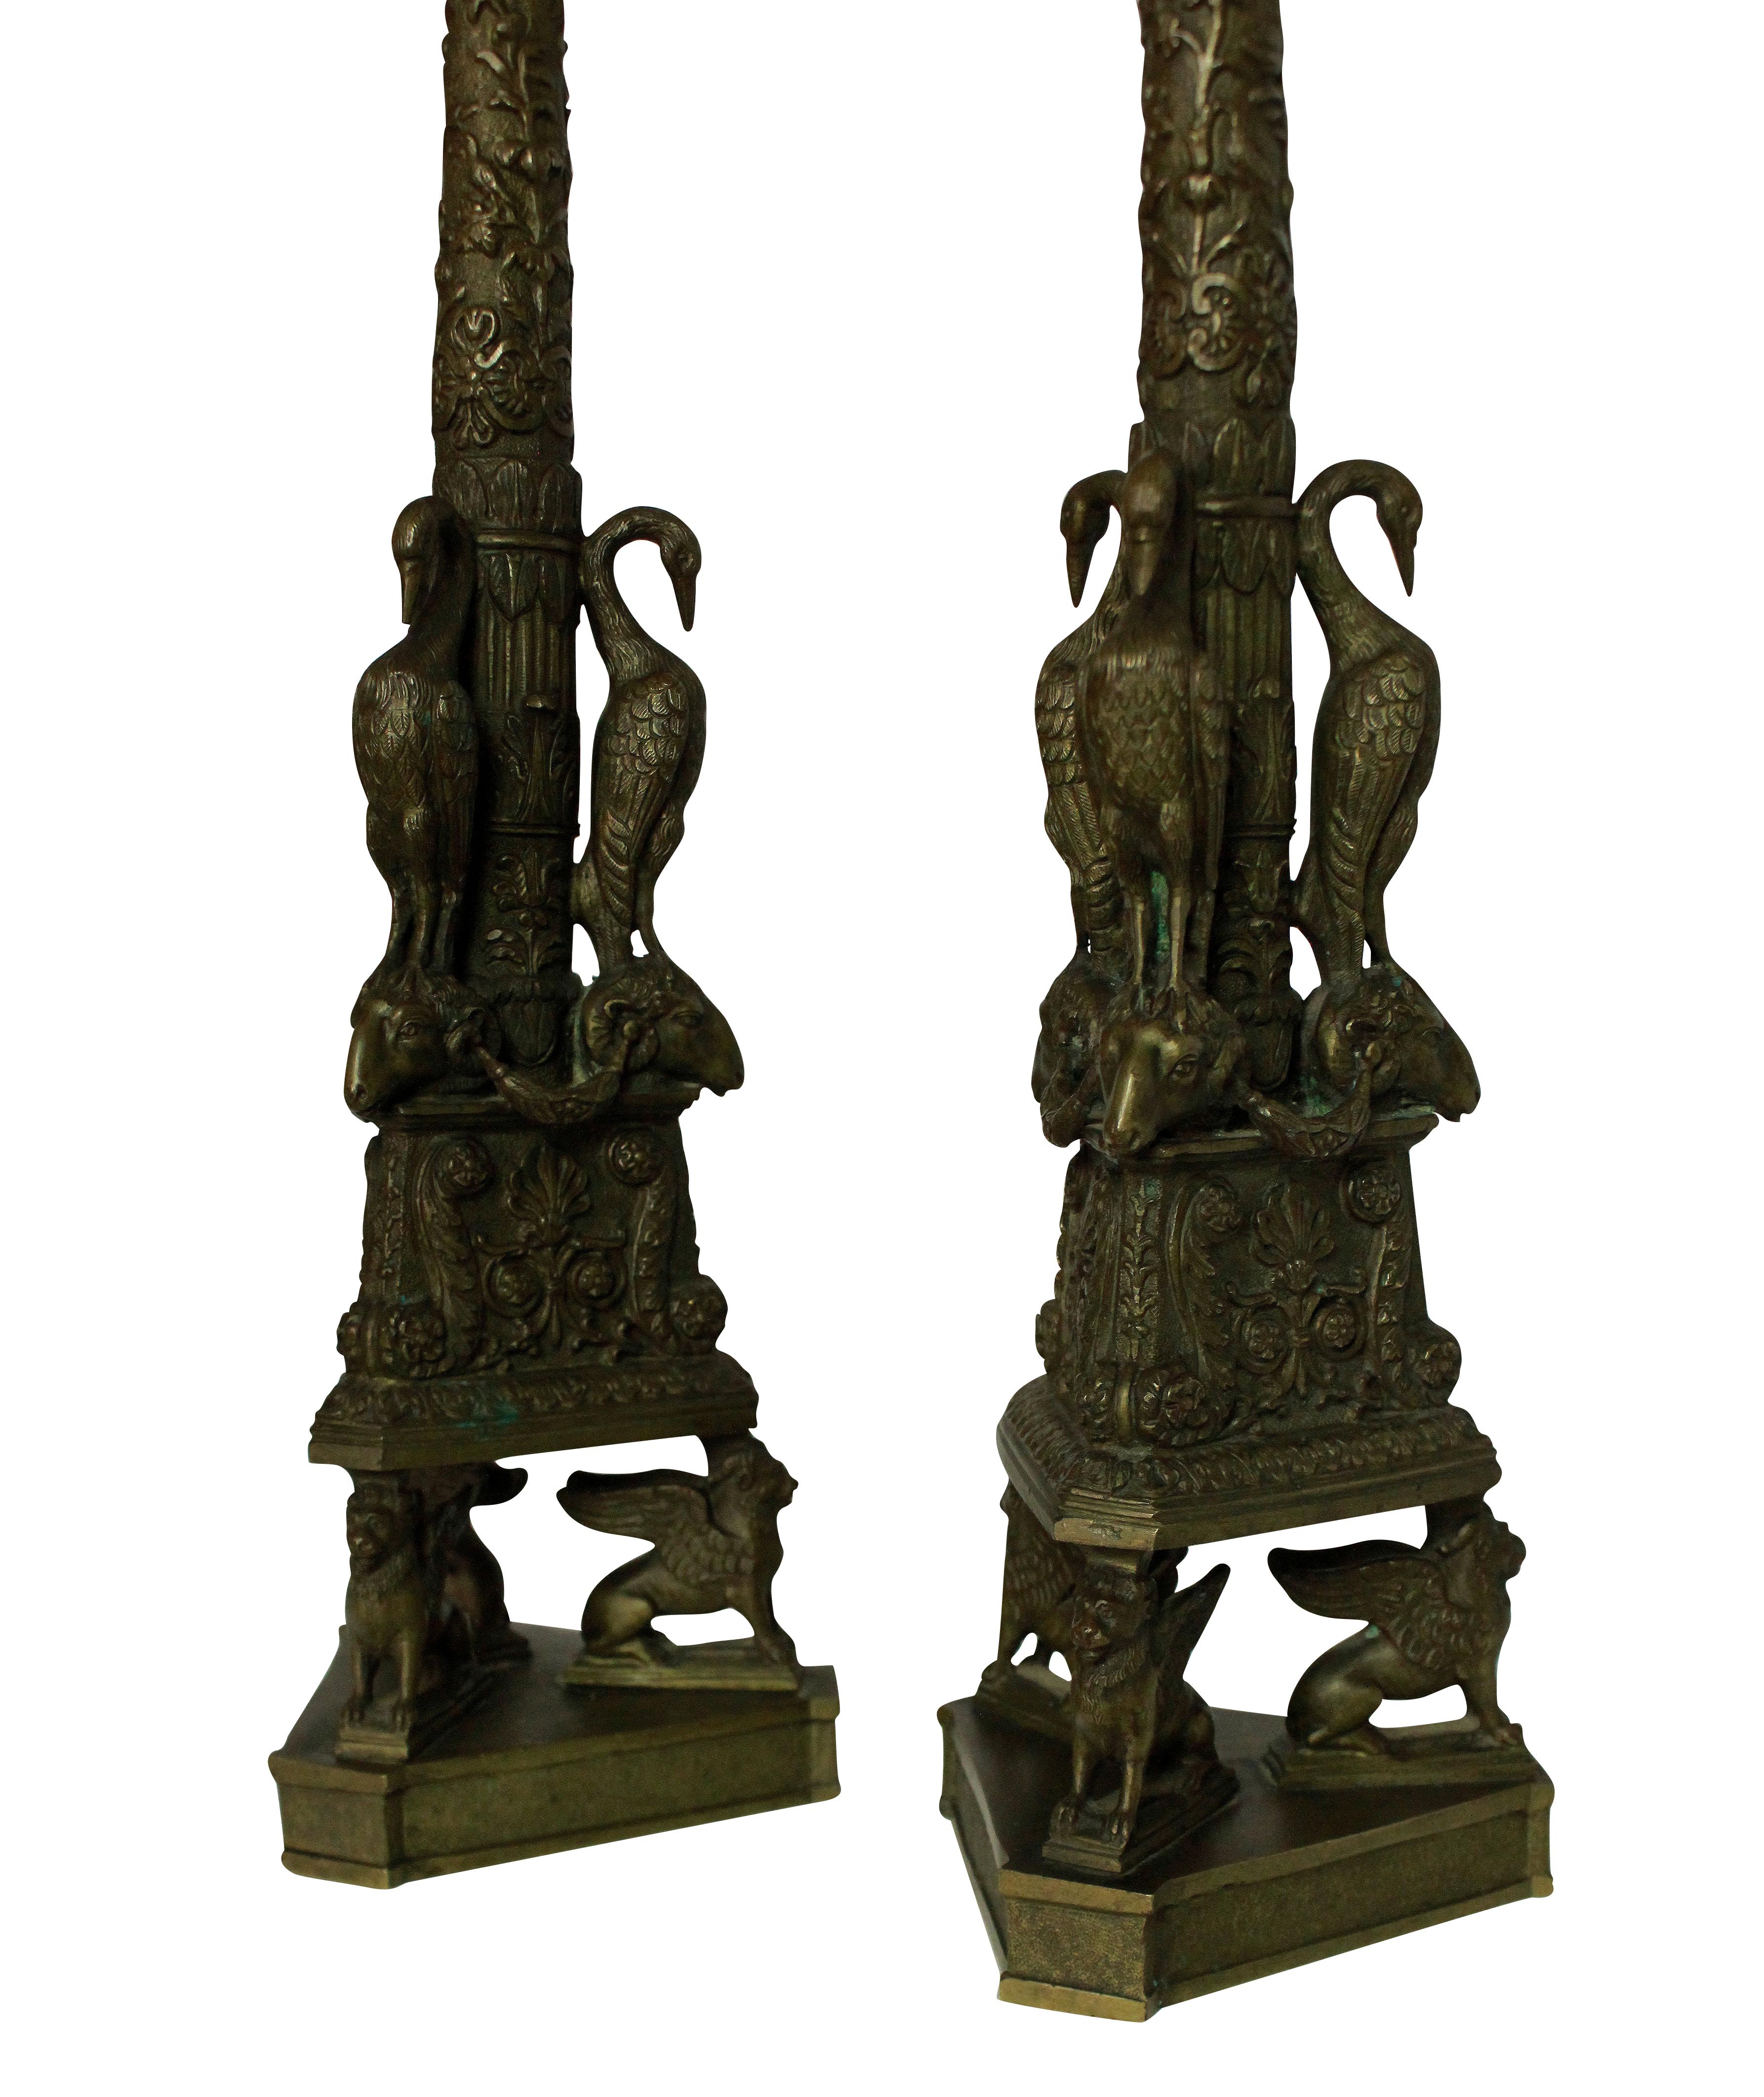 Baroque Pair of Exceptional Bronze Candlesticks after the Piranesi Model